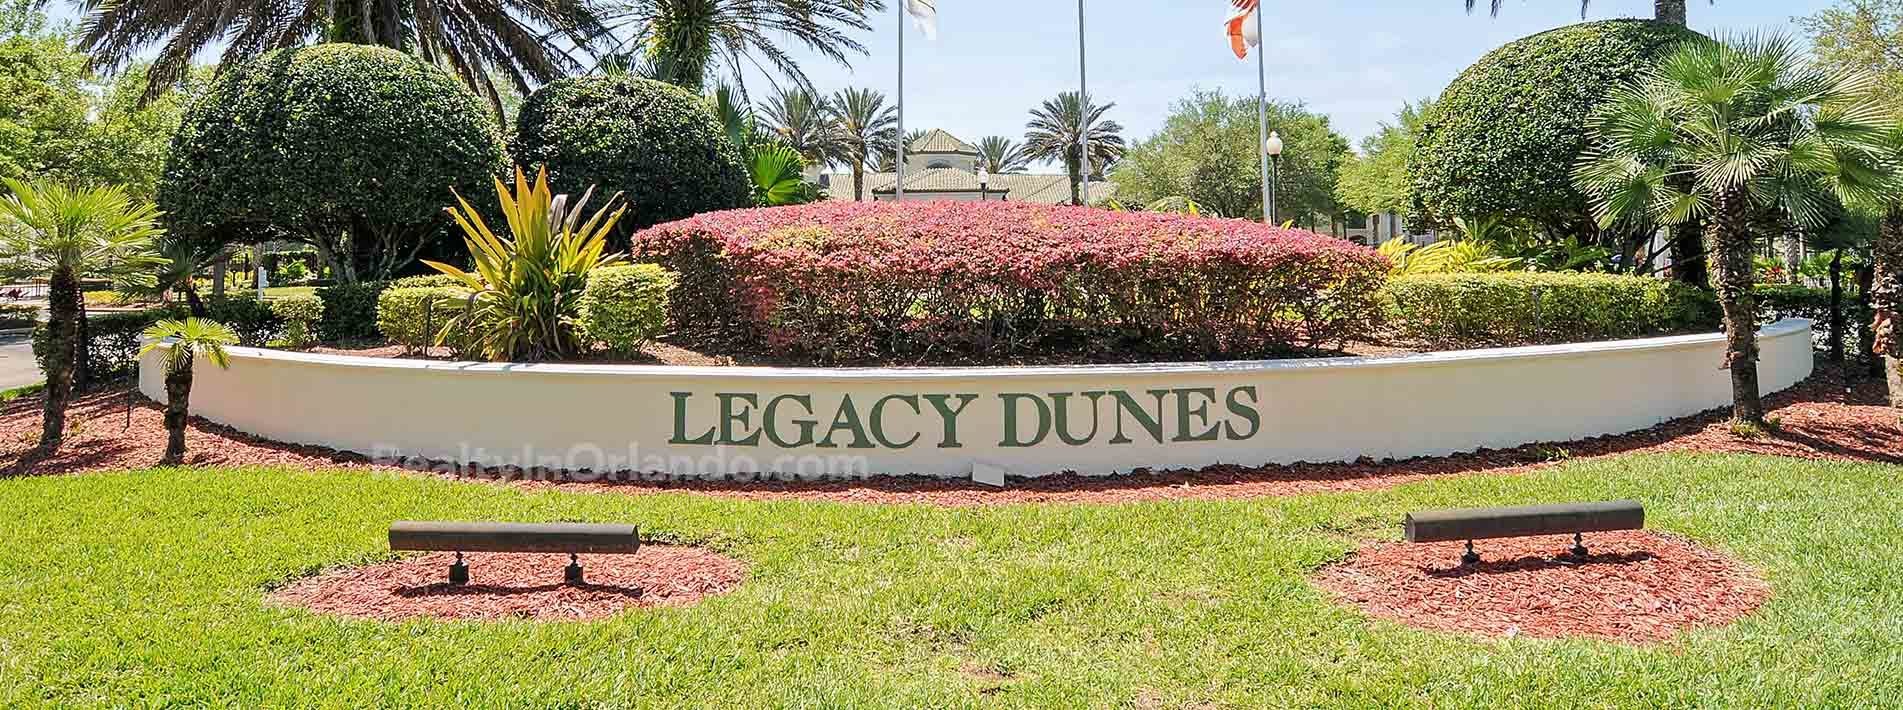 Legacy Dunes Kissimmee Investment Real Estate